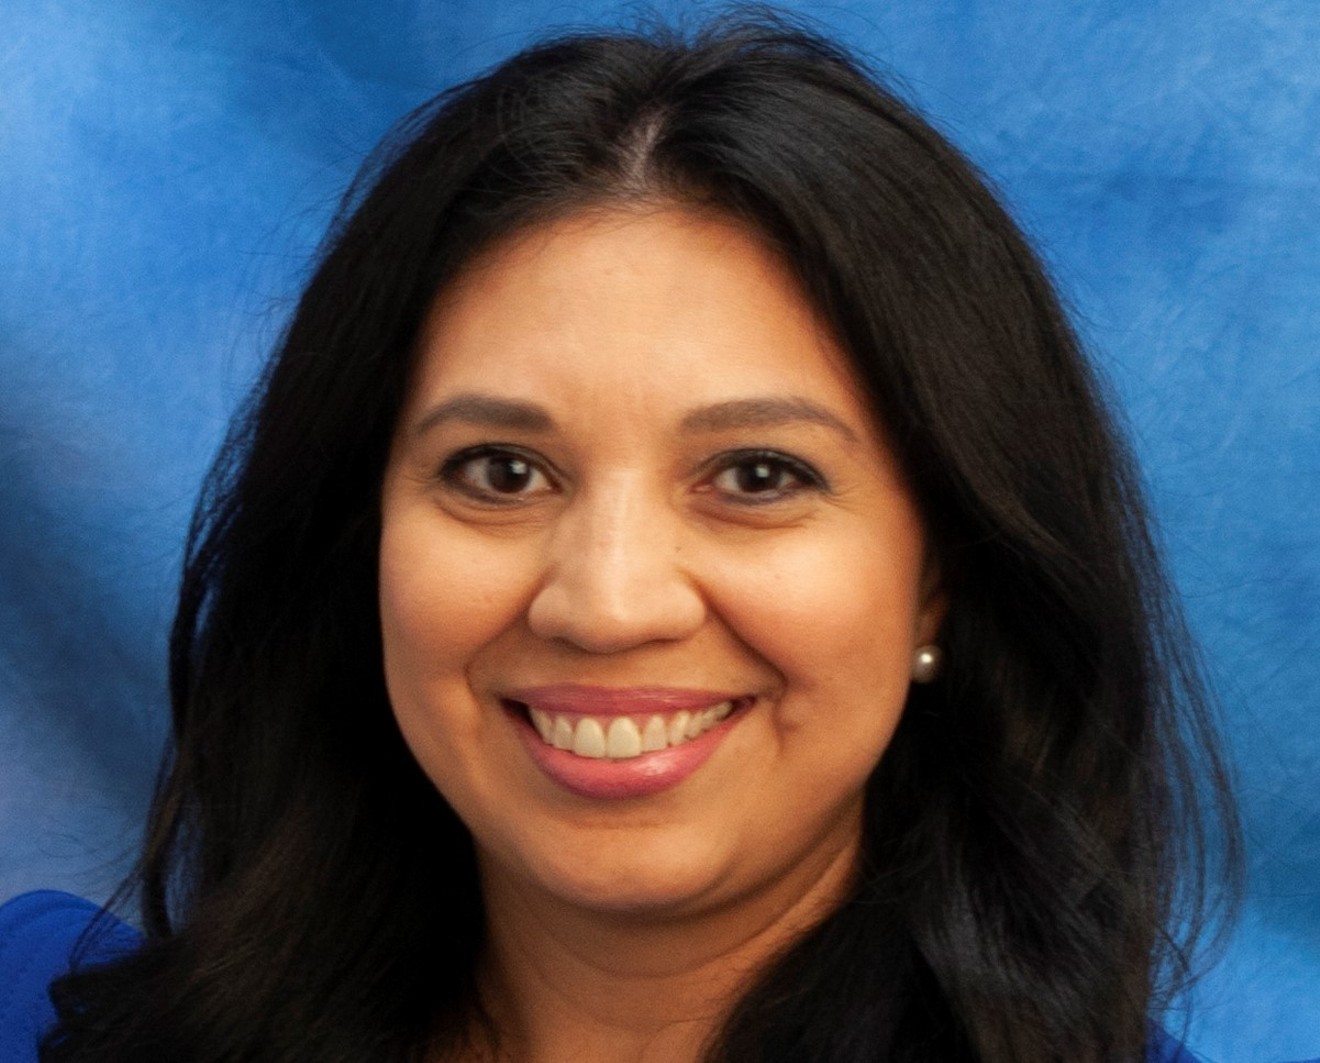 Phoenix City Council staff member Felicita Mendoza was appointed on Tuesday to fill a vacancy on the council.